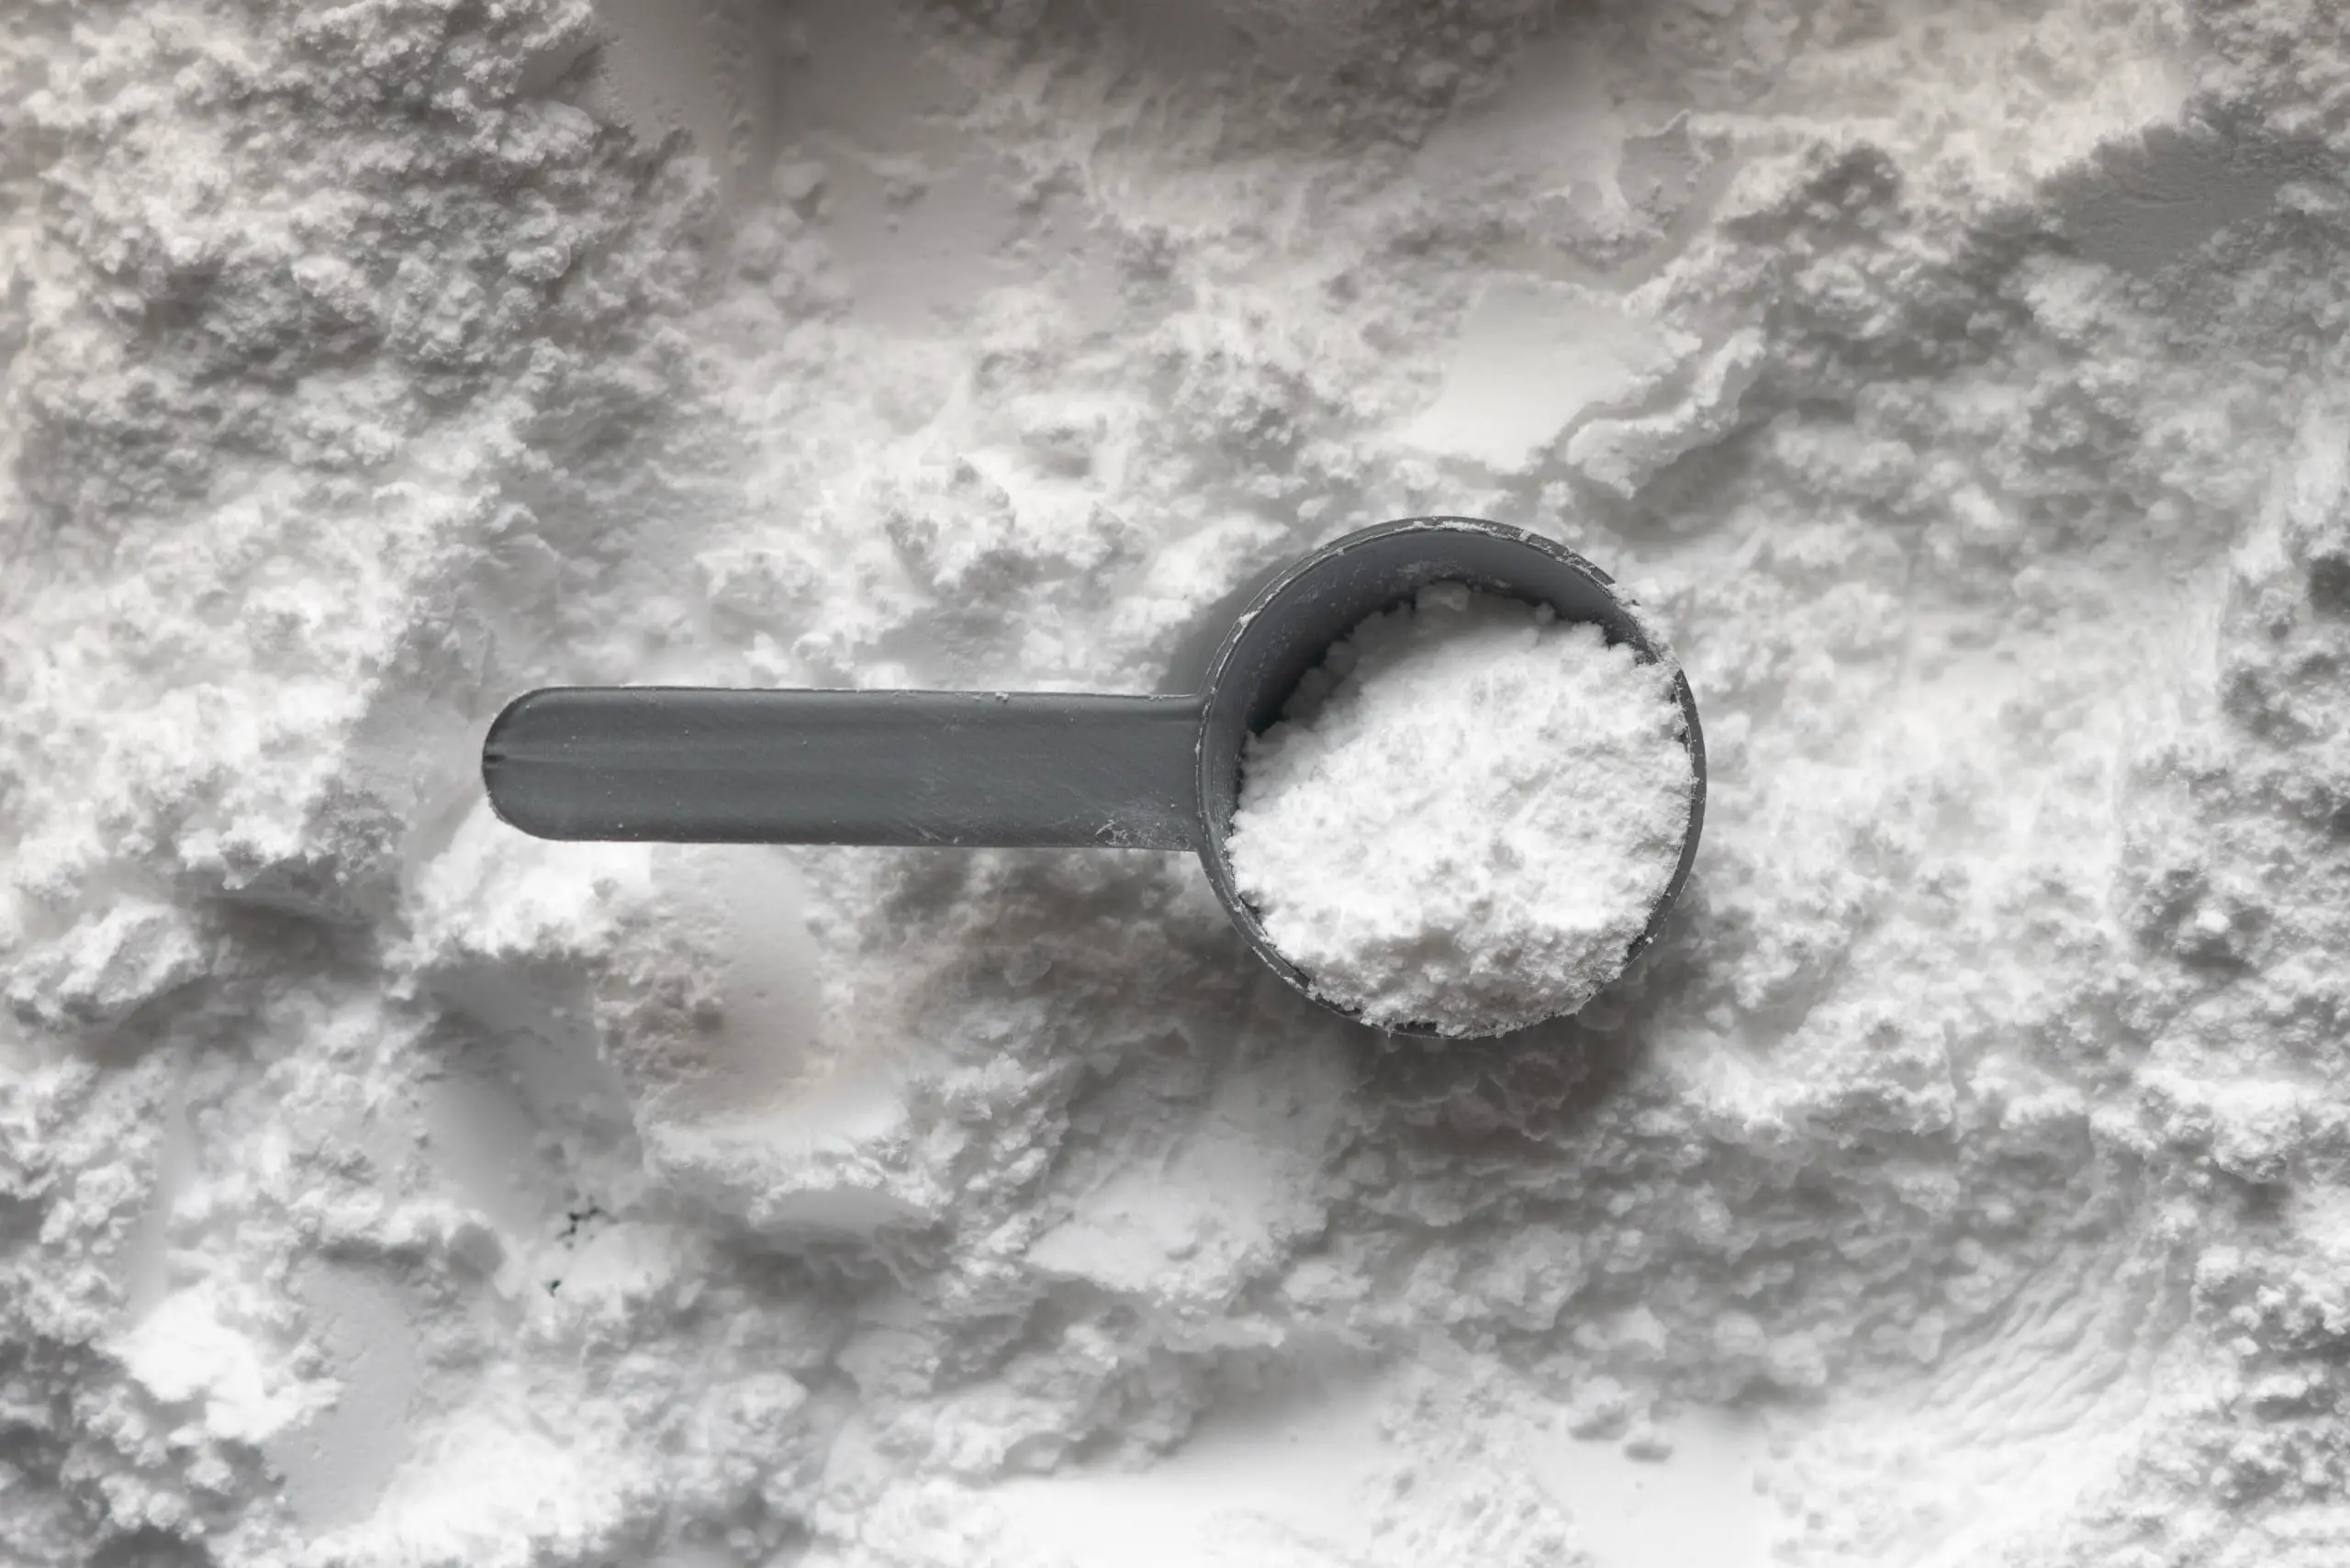 Does Creatine Make You Gain Weight? Best Info. To Find Out With 8 FAQ’s.